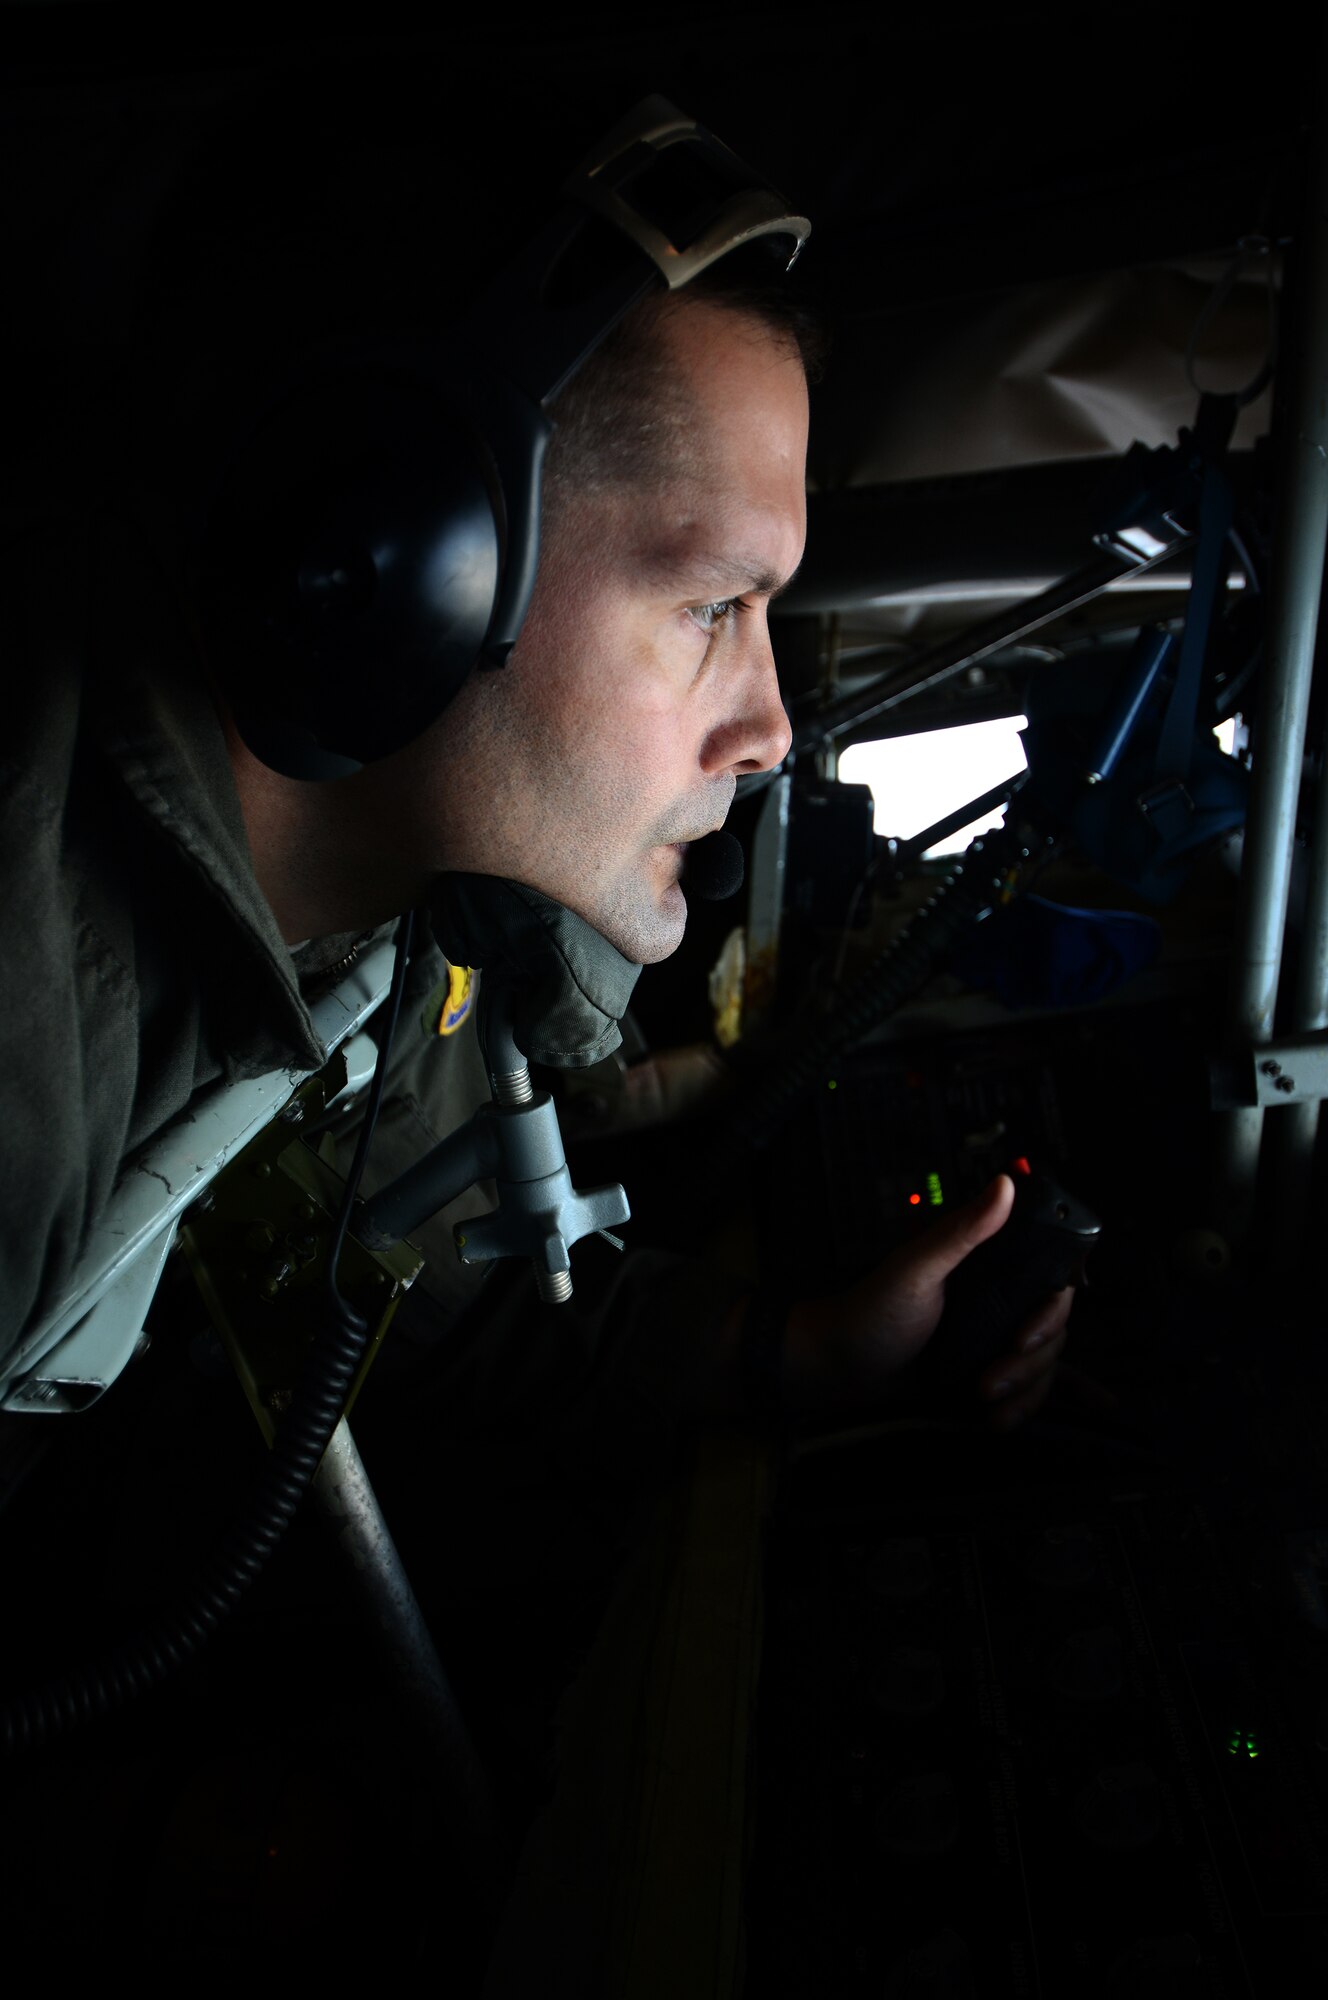 U.S. Air Force Senior Master Sgt. Doug Palmisano, KC-135 Stratotanker boom operator assigned to the 909th Air Refueling Squadron, Kadena Air Base, Japan, conducts refueling operations May 12, 2016, over the Joint Pacific Alaska Range Complex. Boom operators on a KC-135 have the ability to pump thousands of pounds of fuel to any capable aircraft, thousands of feet above the ground, flying at 200 knots (230 miles per hour), all while only 47 feet from the receiving aircraft. (U.S. Air Force photo by Tech. Sgt. Steven R. Doty)